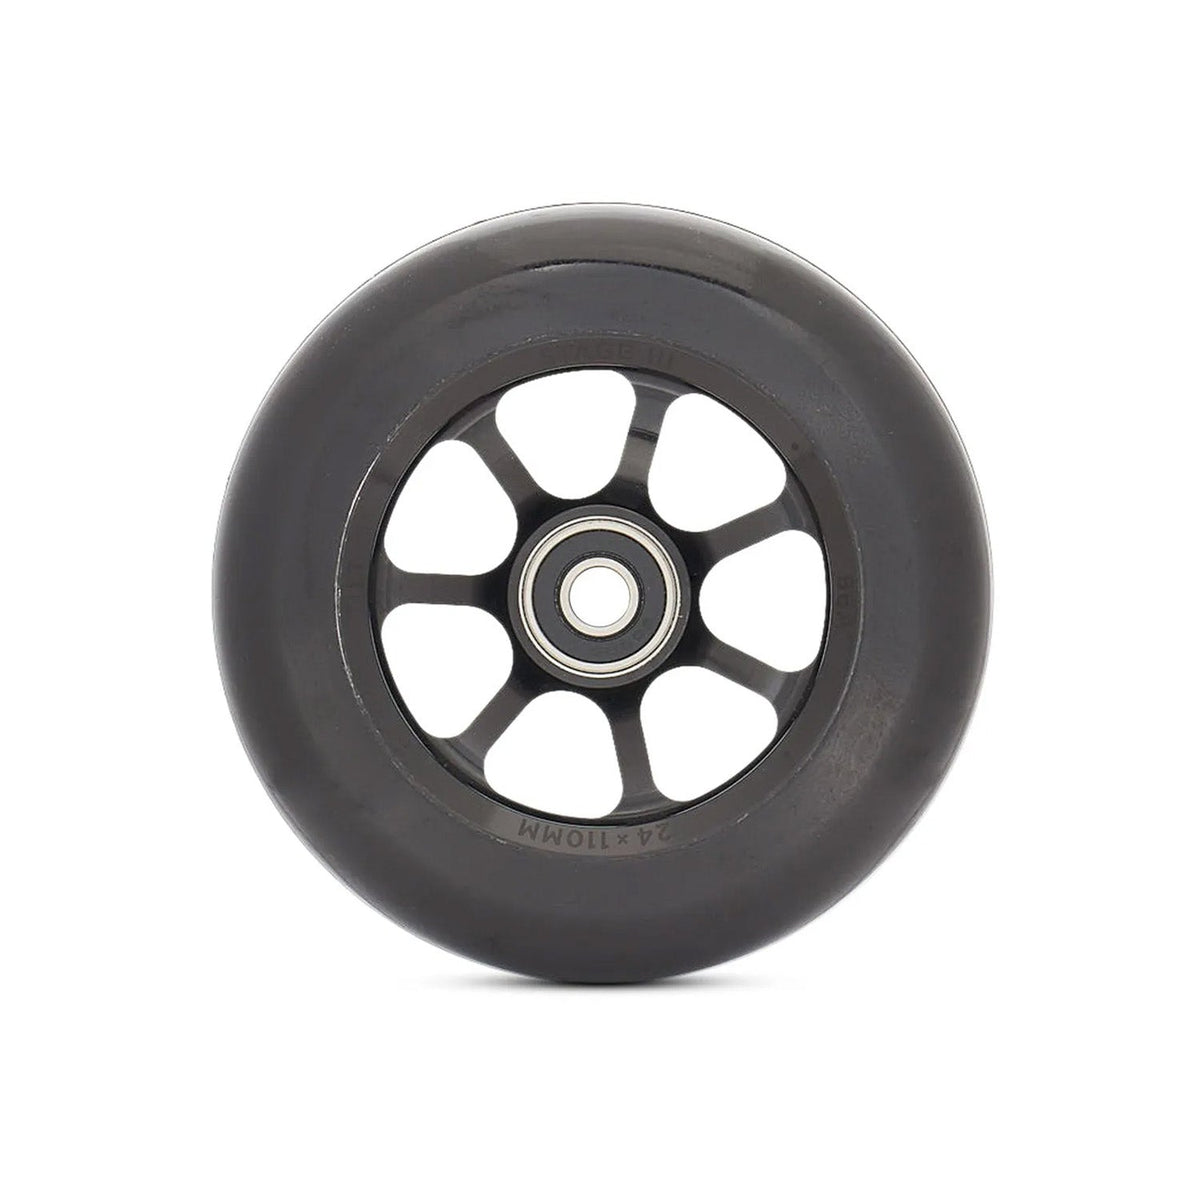 Tilt Durare Spoked Wheels - Riding Scooters - Bland Pro Shop